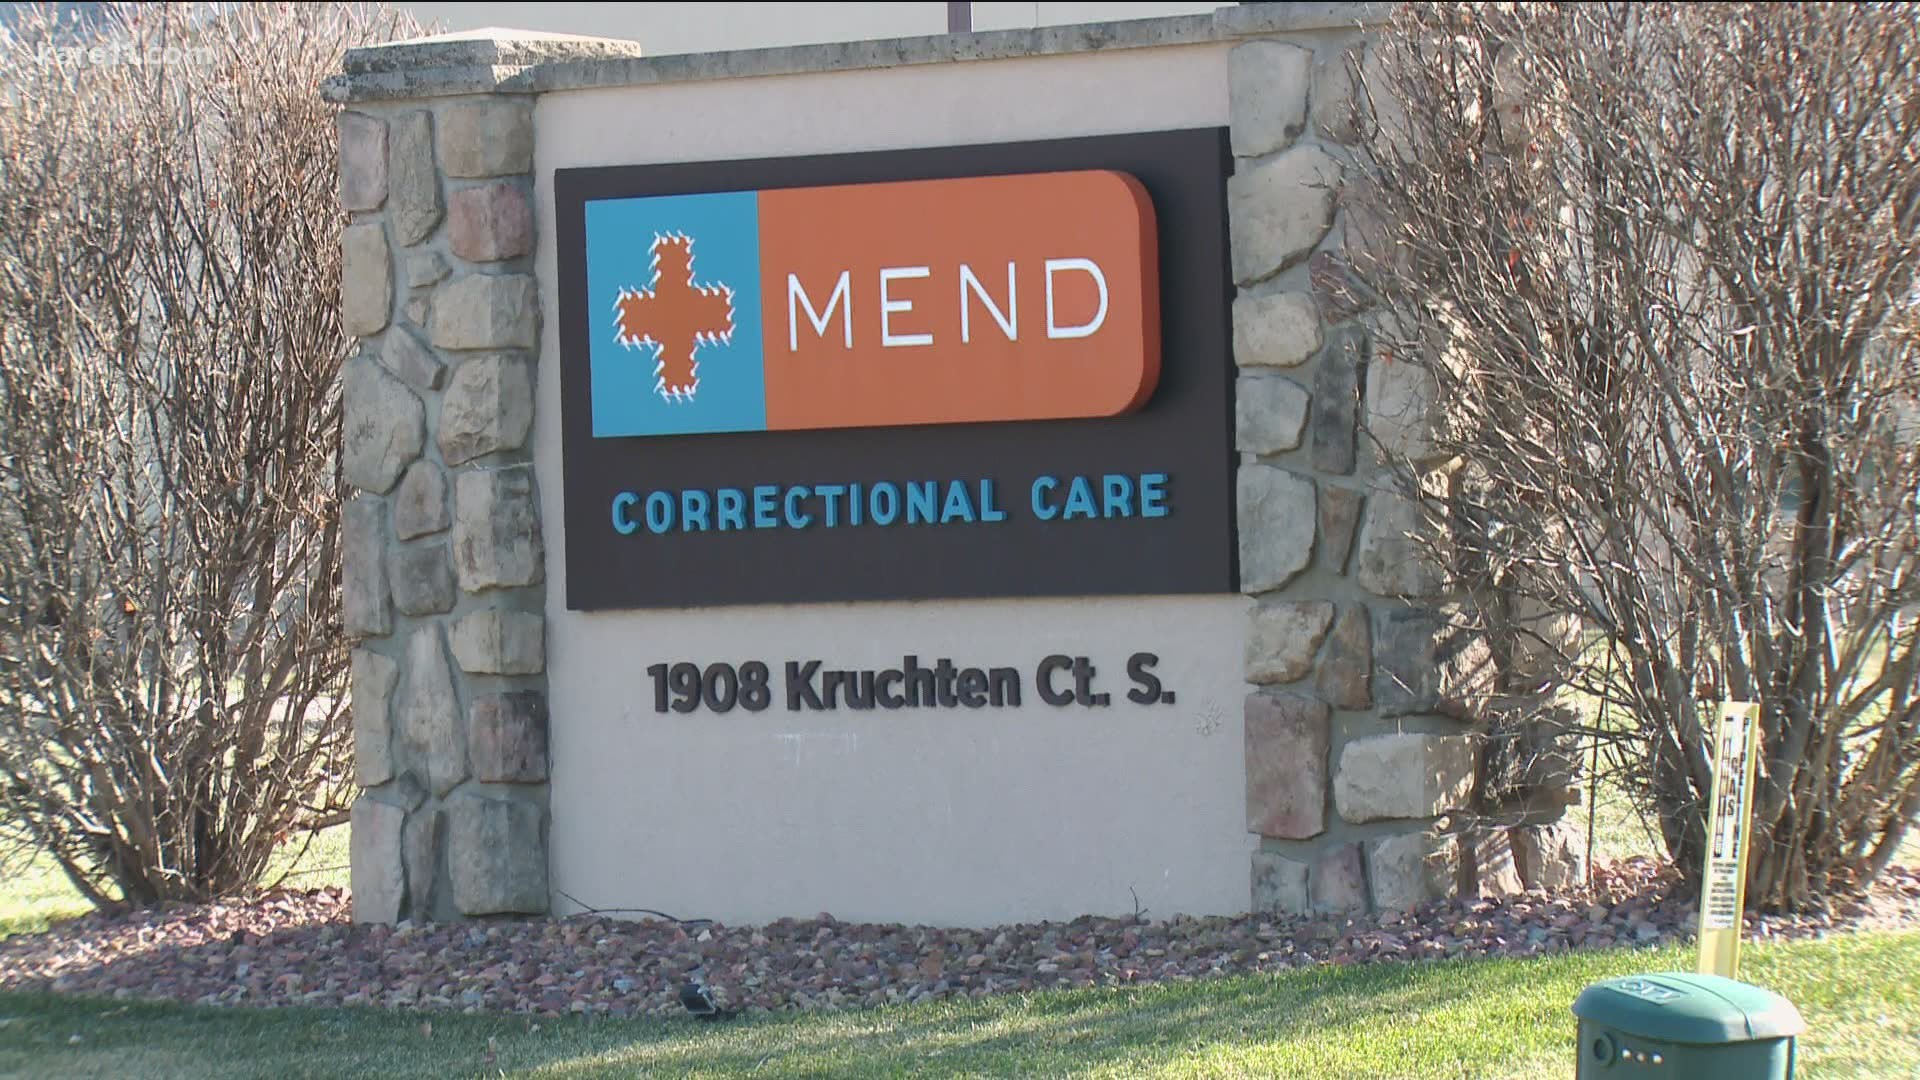 MEnD Correctional Care gets another multi-million, taxpayer-funded contract to provide health care for inmates without disclosing its troubled past